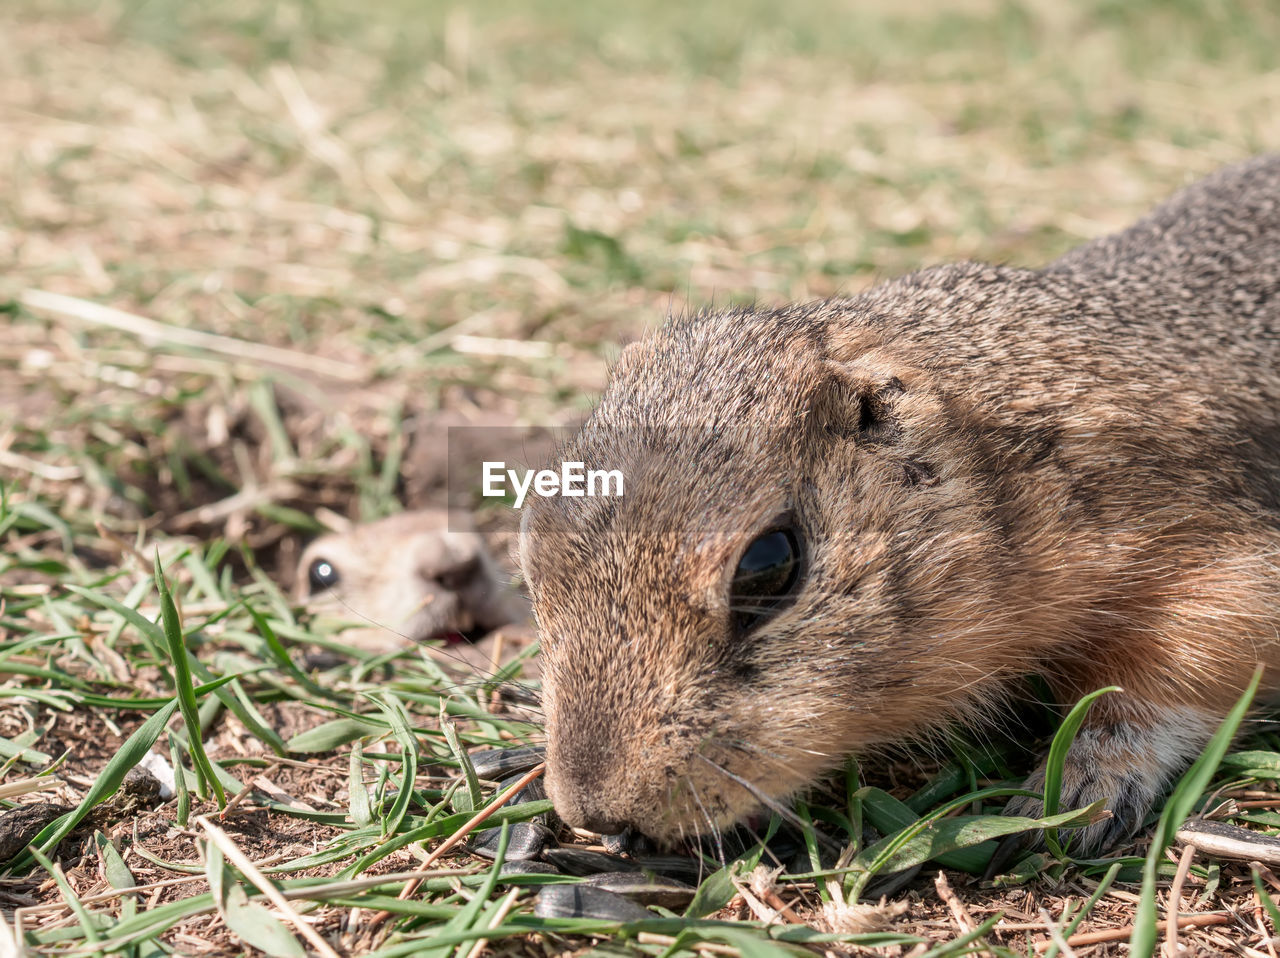 Gopher is eating sunflower seeds in a grassy meadow while another gopher  watched him from its hole.